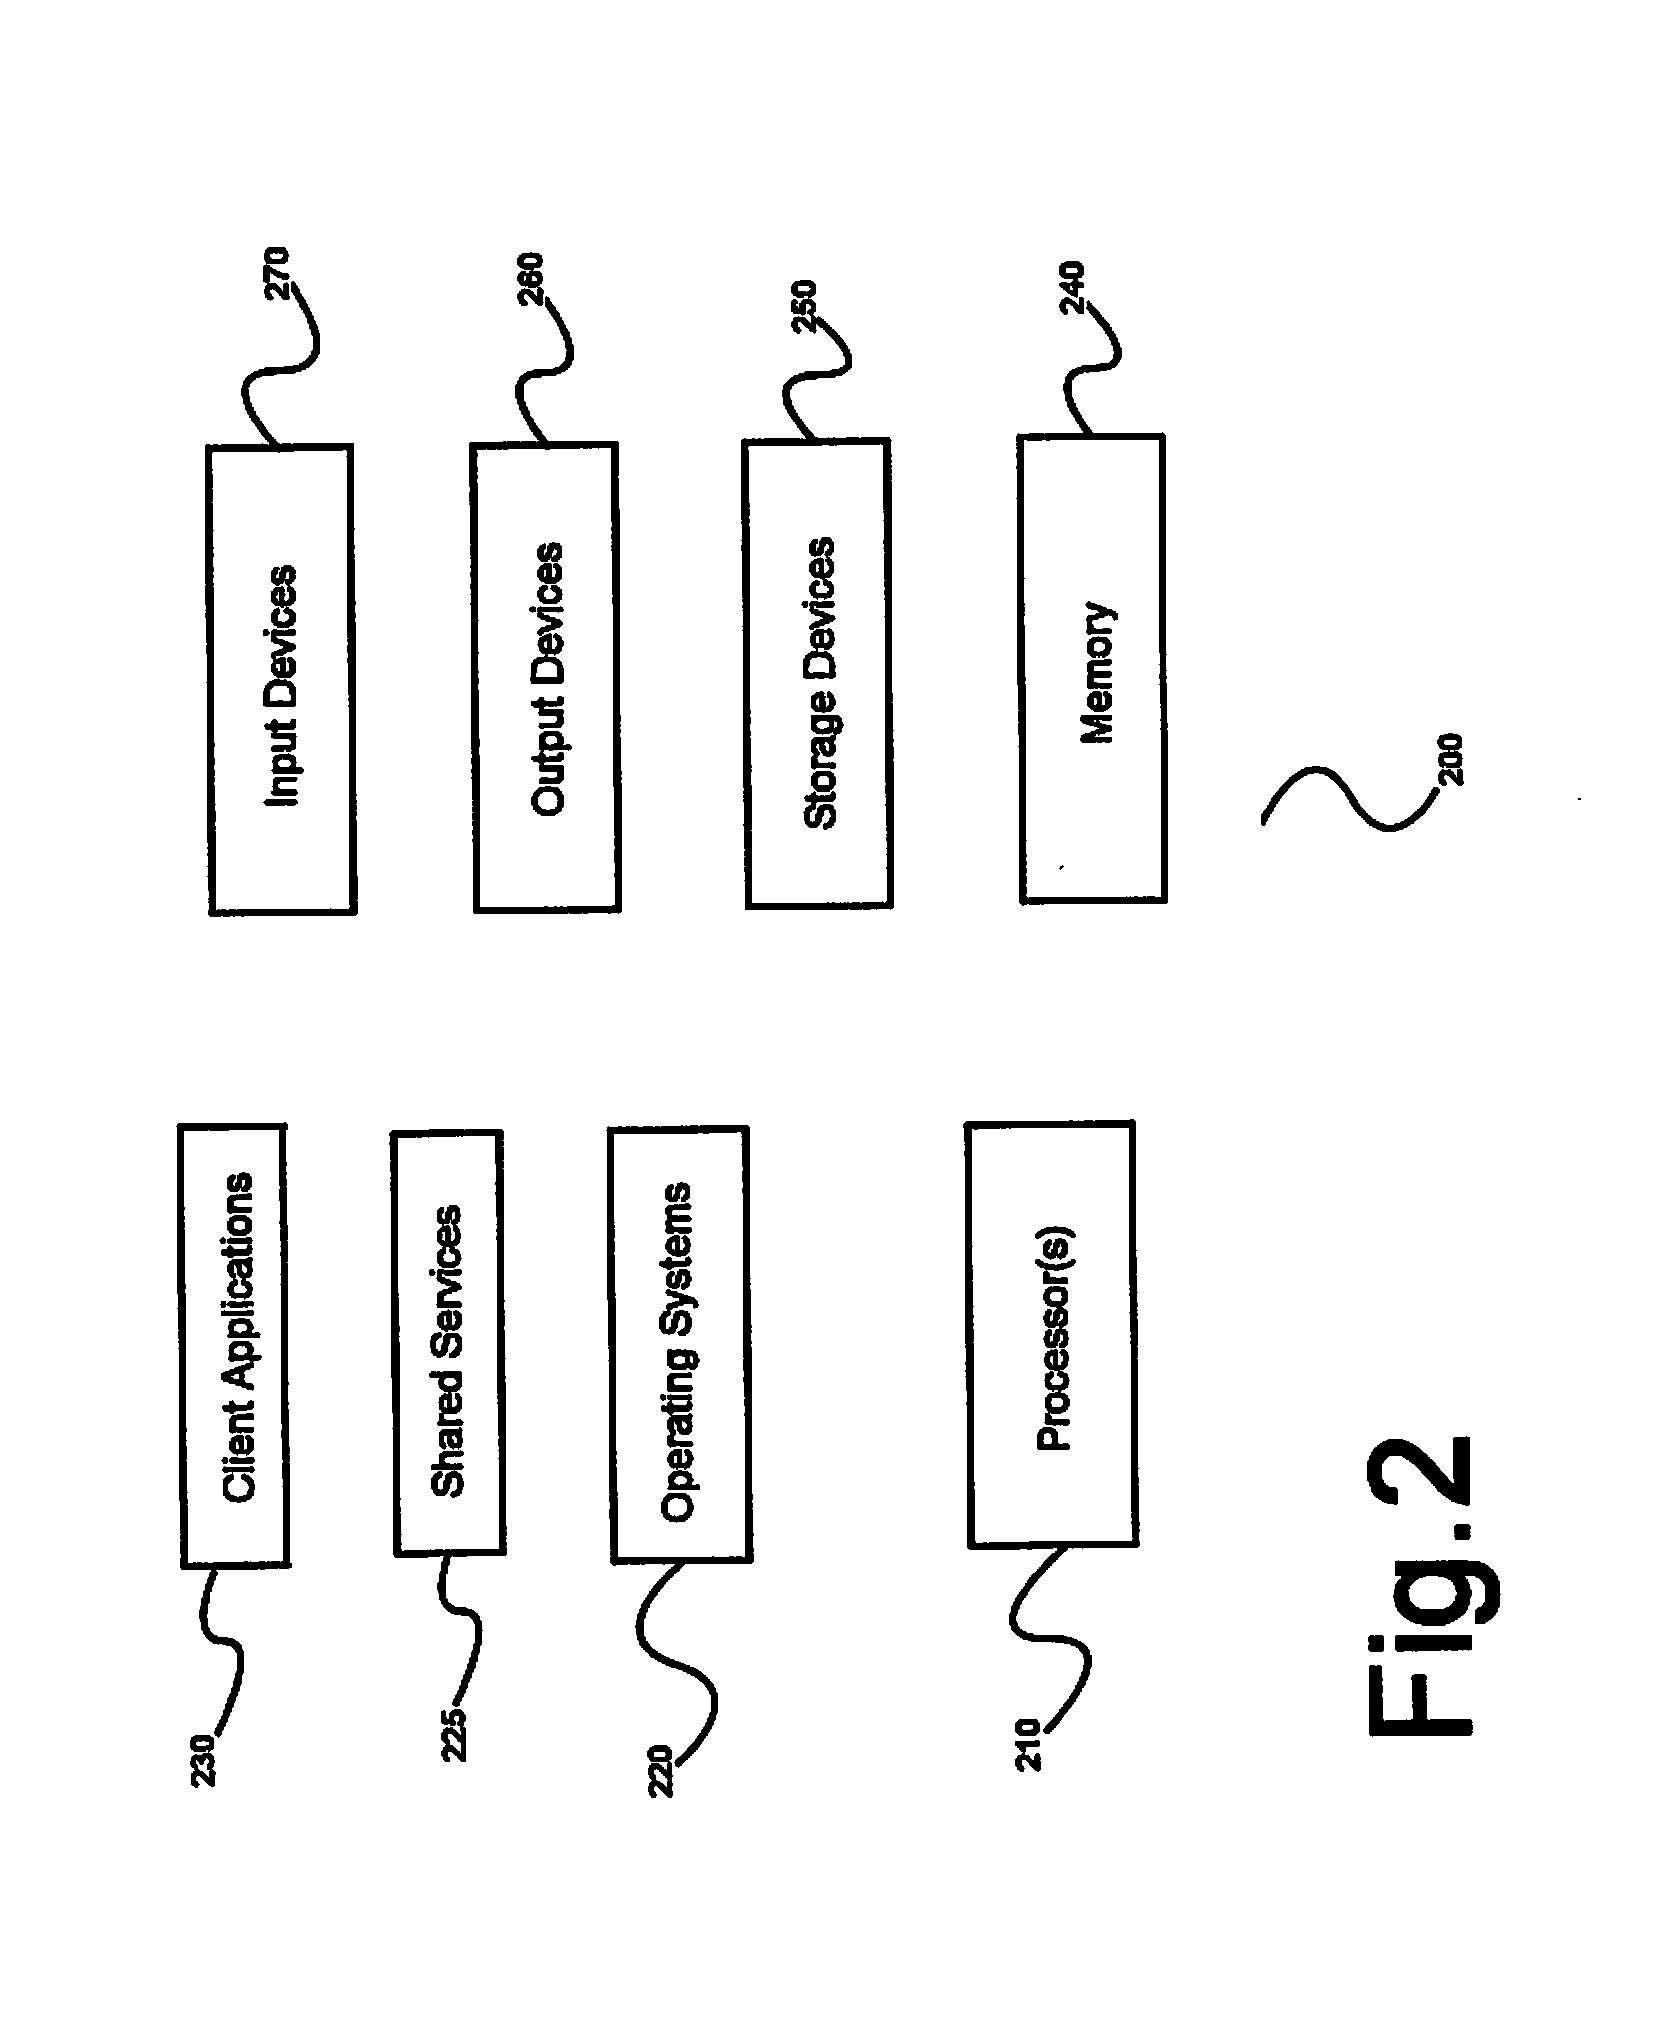 System and methods for semiautomatic generation and tuning of natural language interaction applications